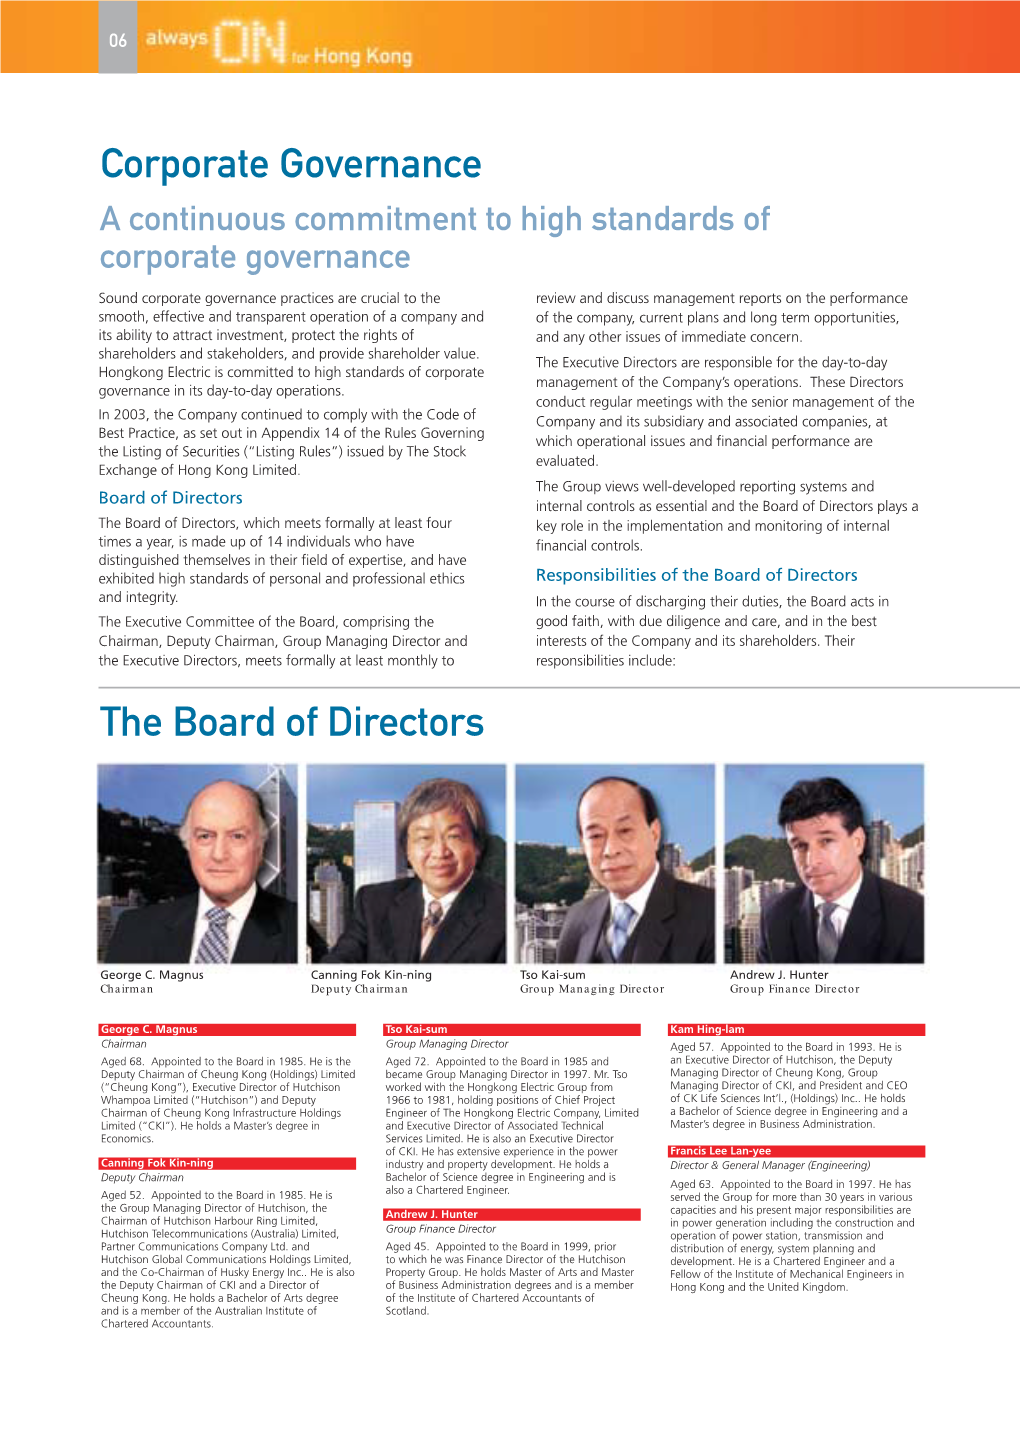 The Board of Directors Corporate Governance